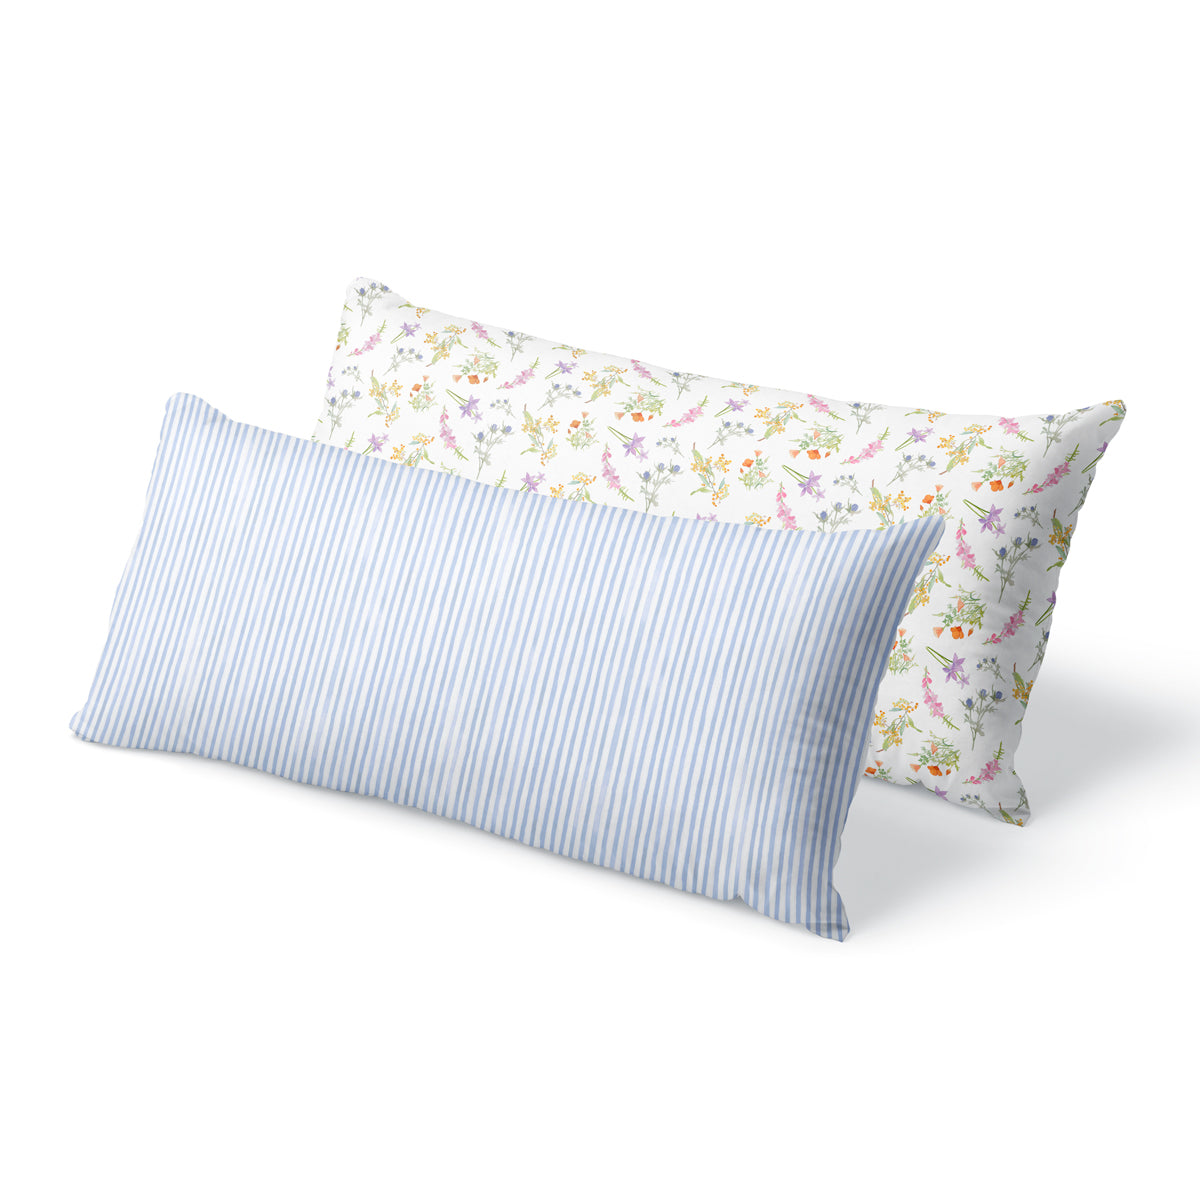 Two king size silk pillowcases - Simple Stripe and Mei Flower